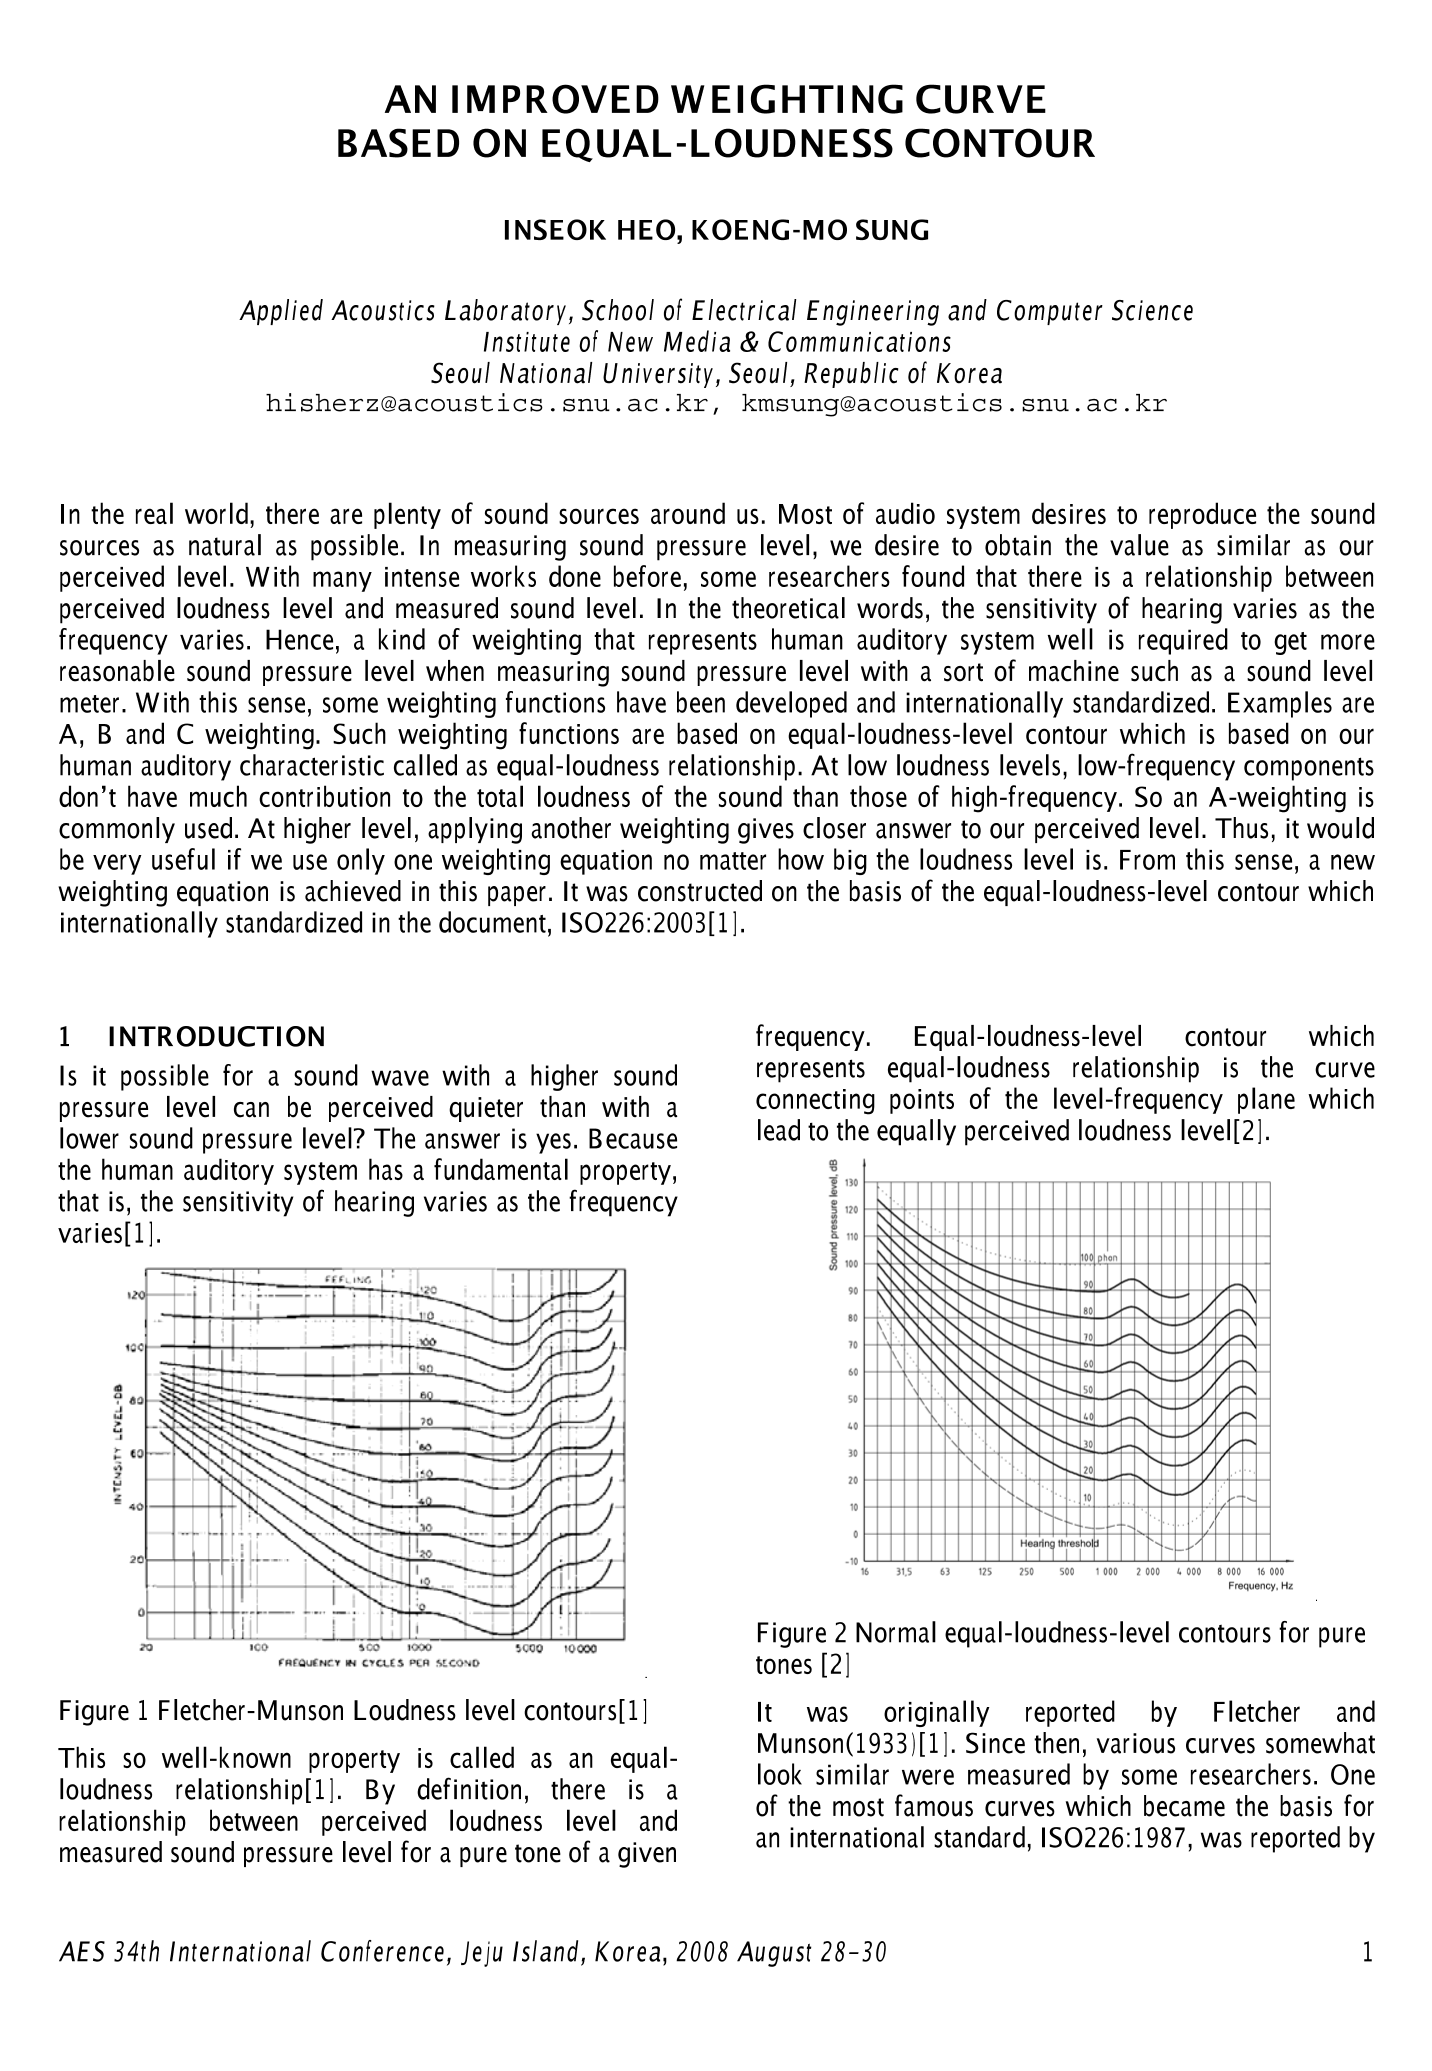 AES E-Library » Improved Weighting Based on Equal-Loudness Contour